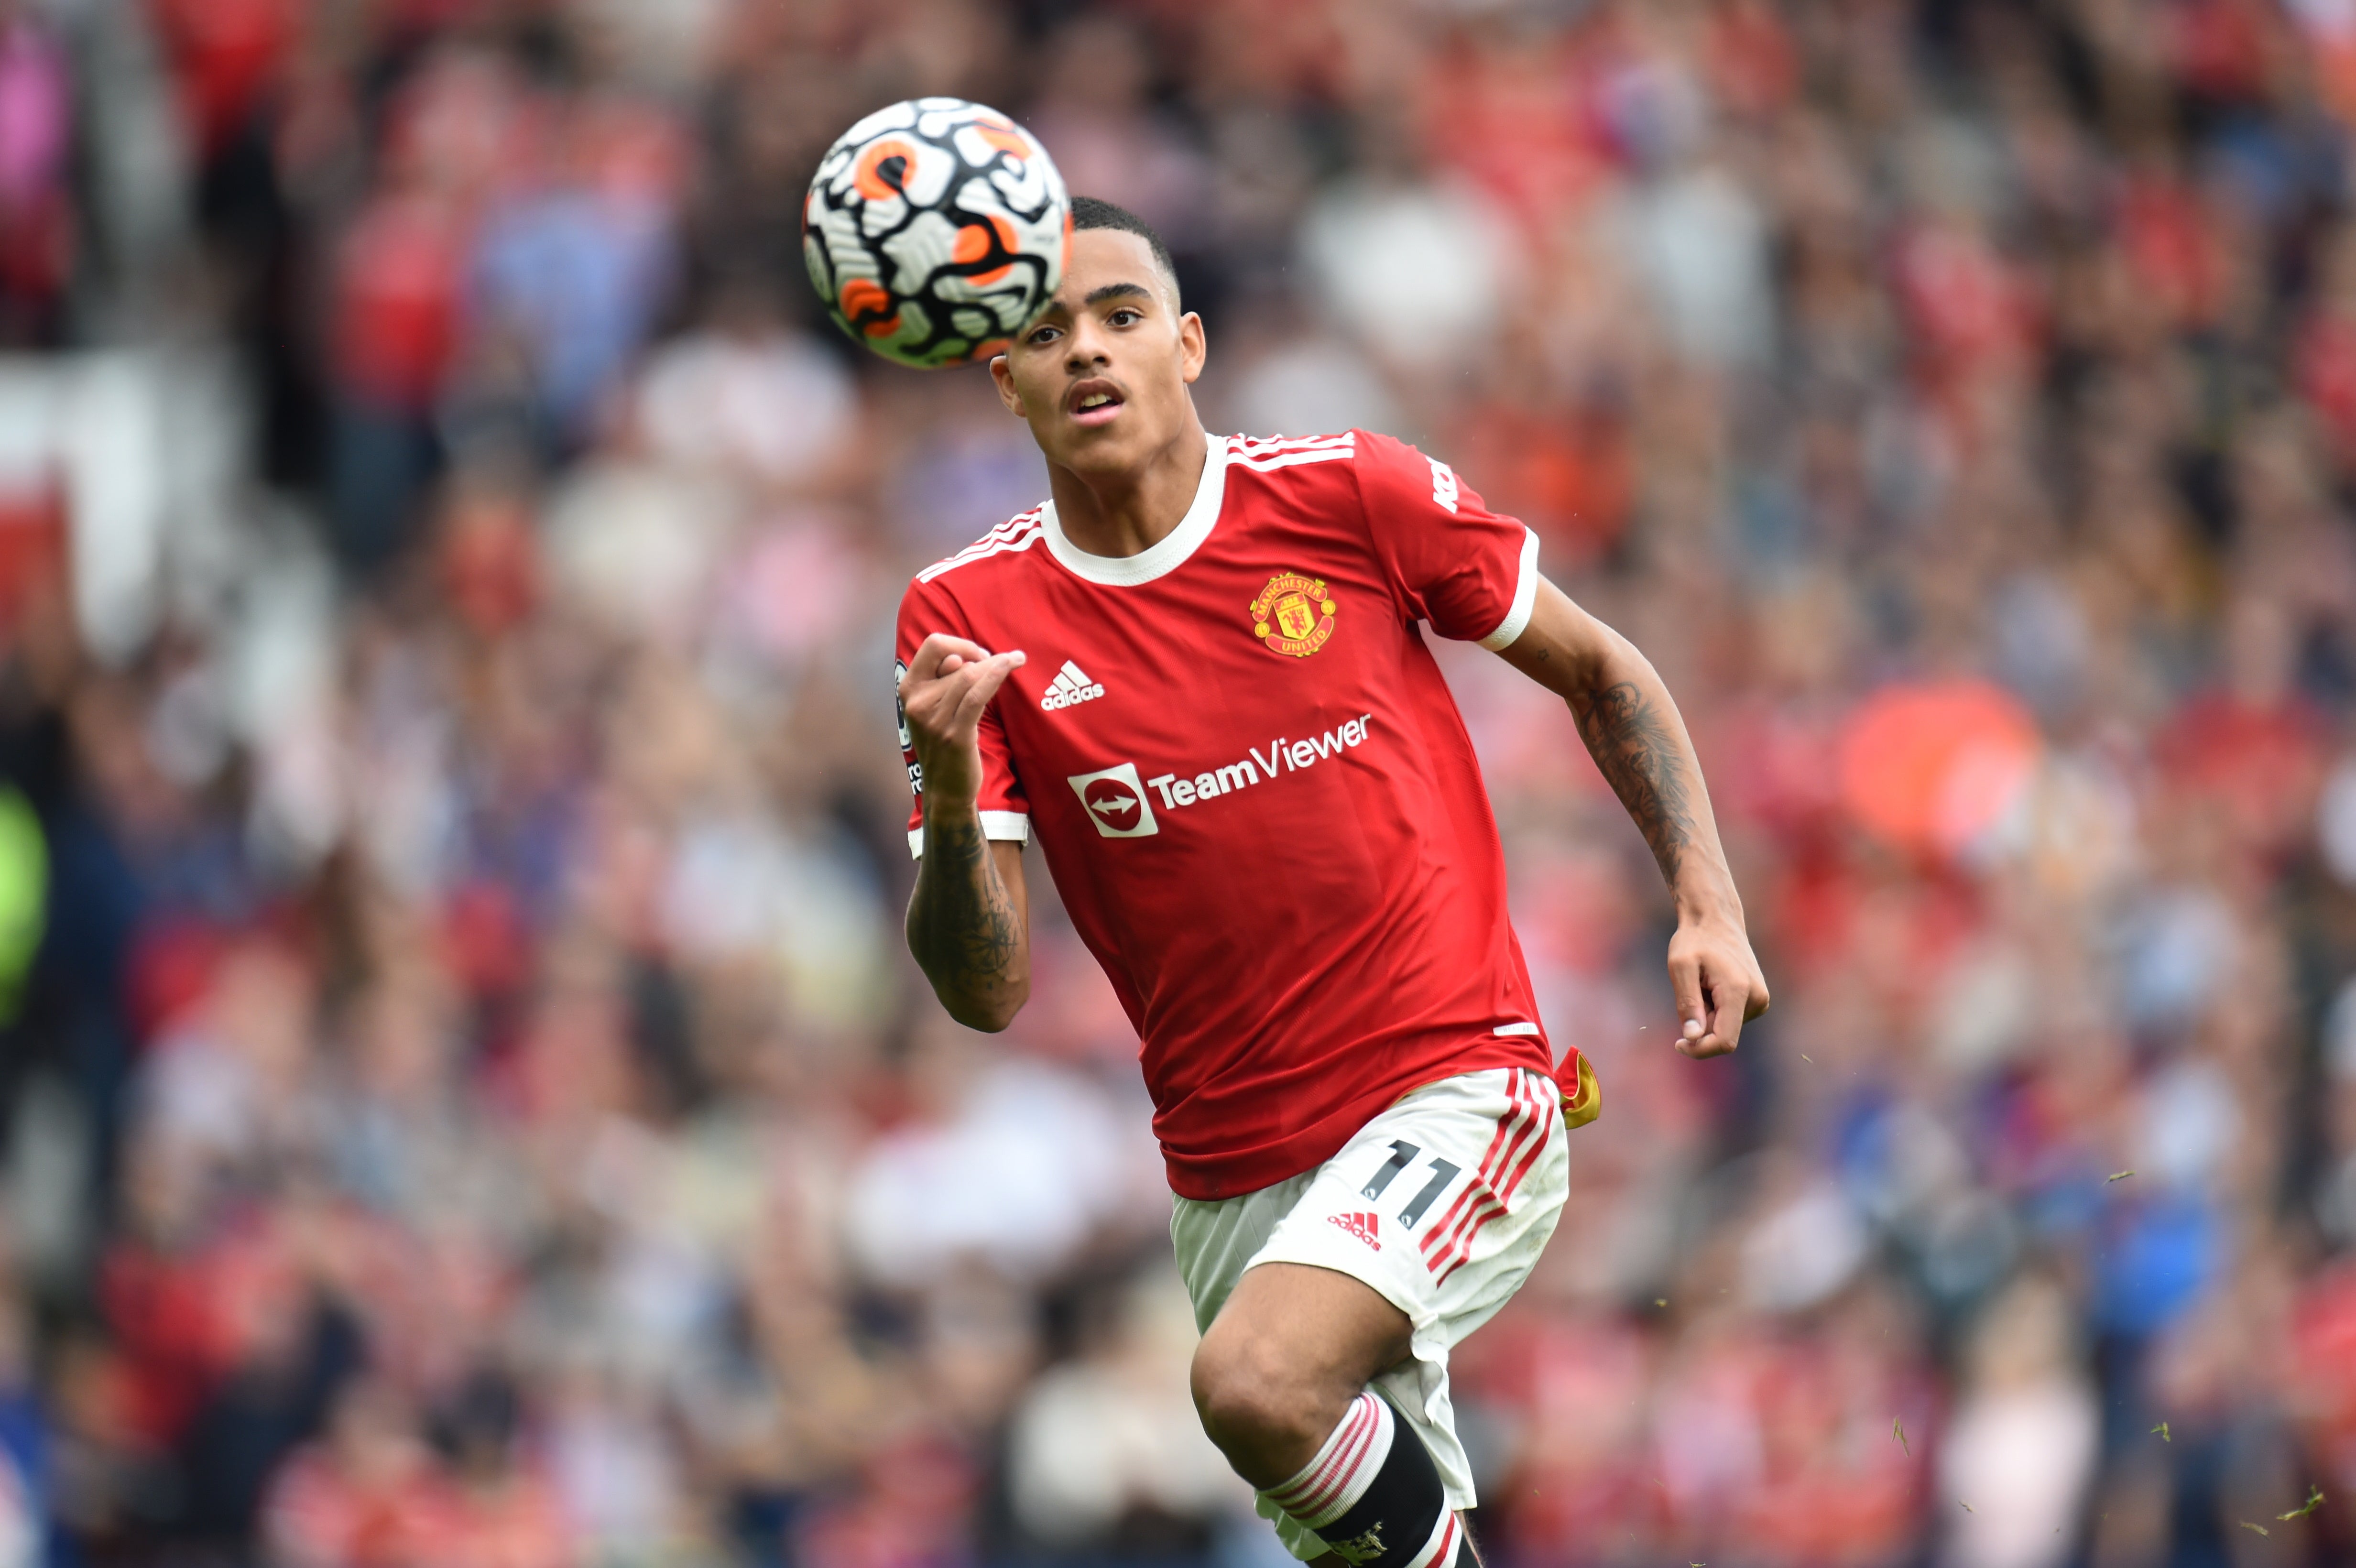 Greenwood will not play for Manchester United again